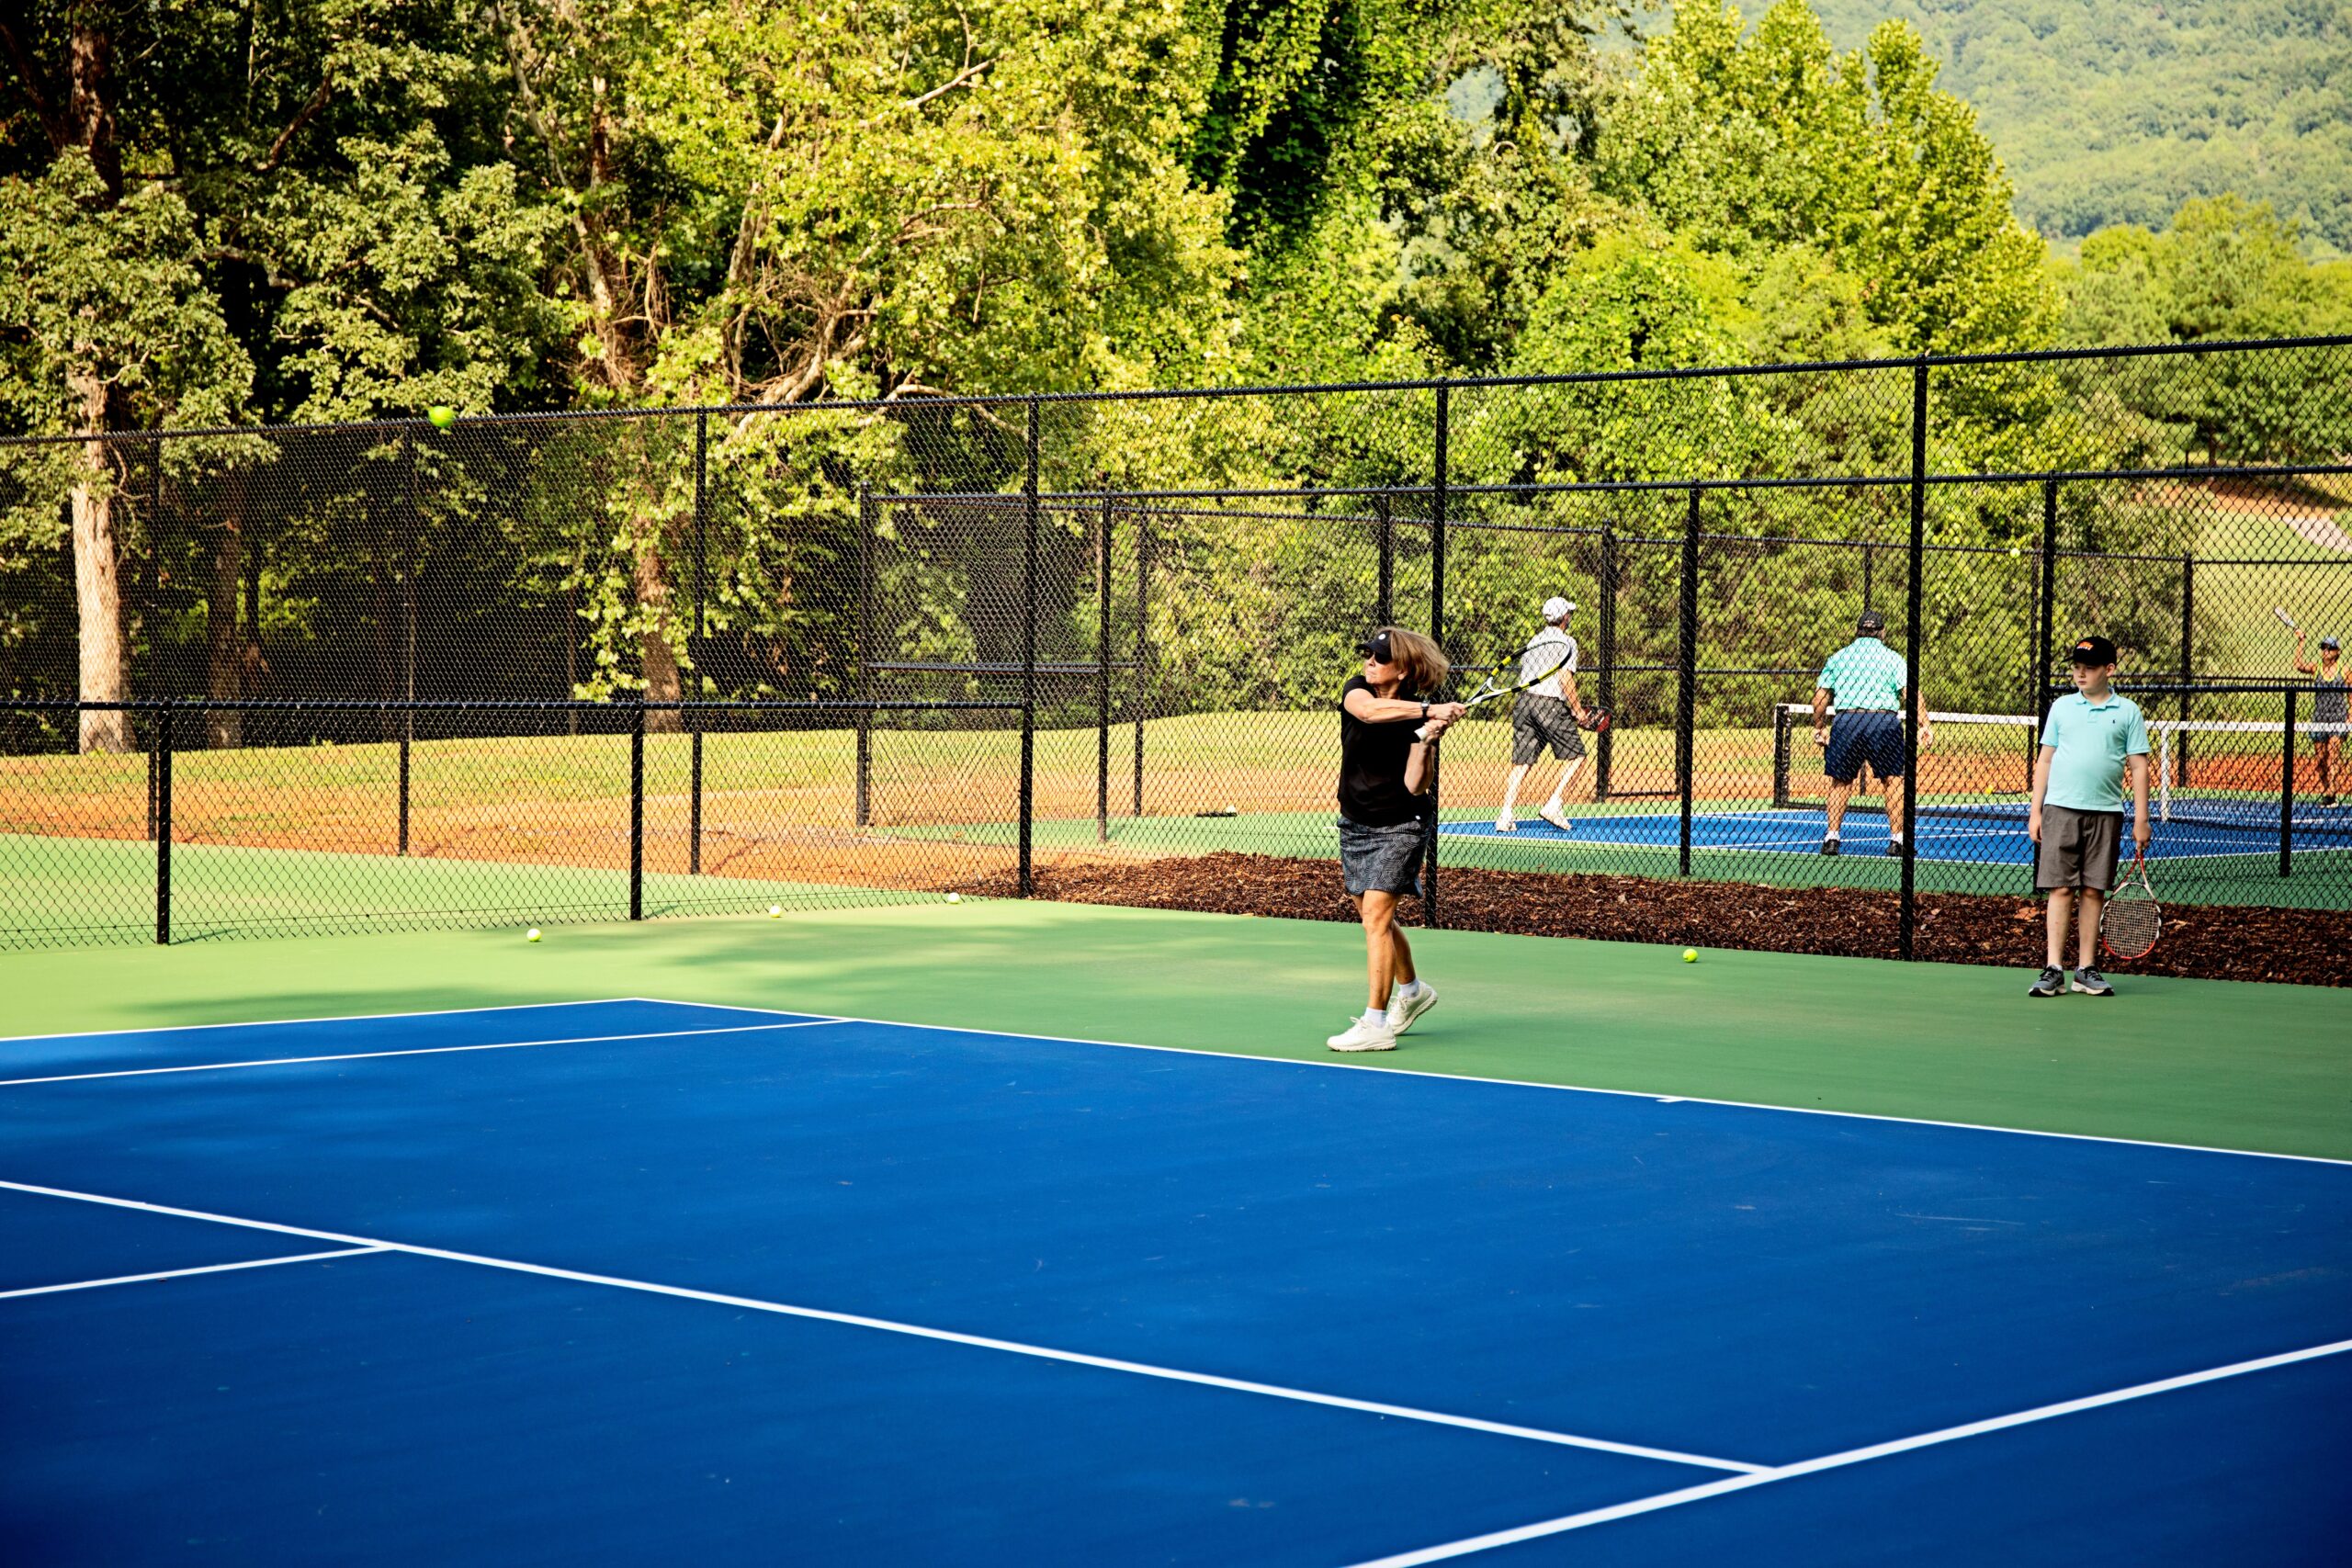 Tennis or pickleball with mountain views at Bright's Creek